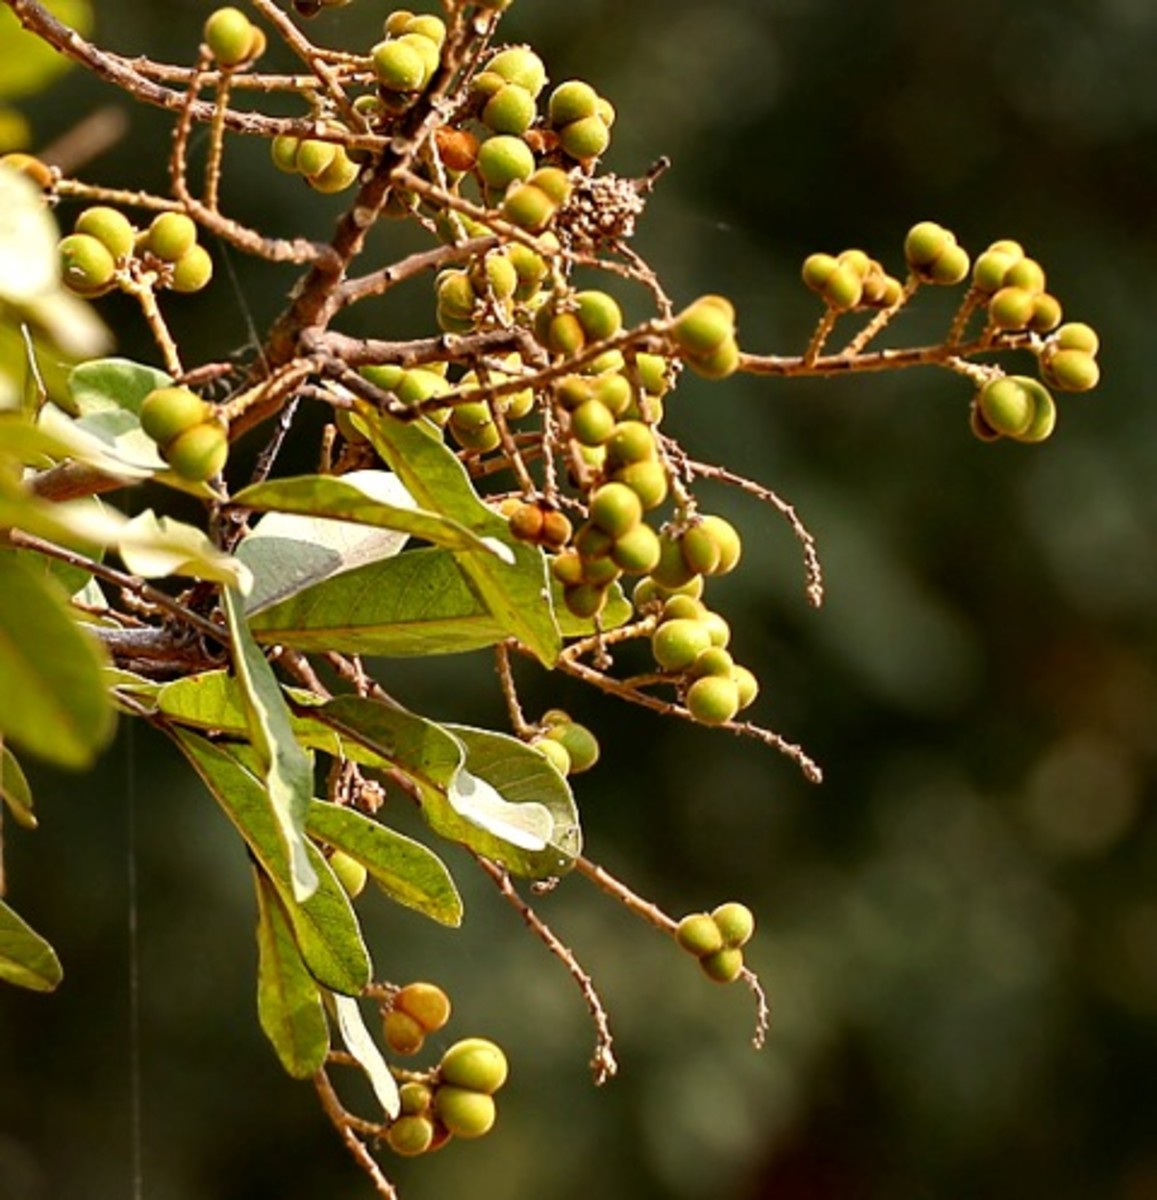 Drupes in Hyderabad, India